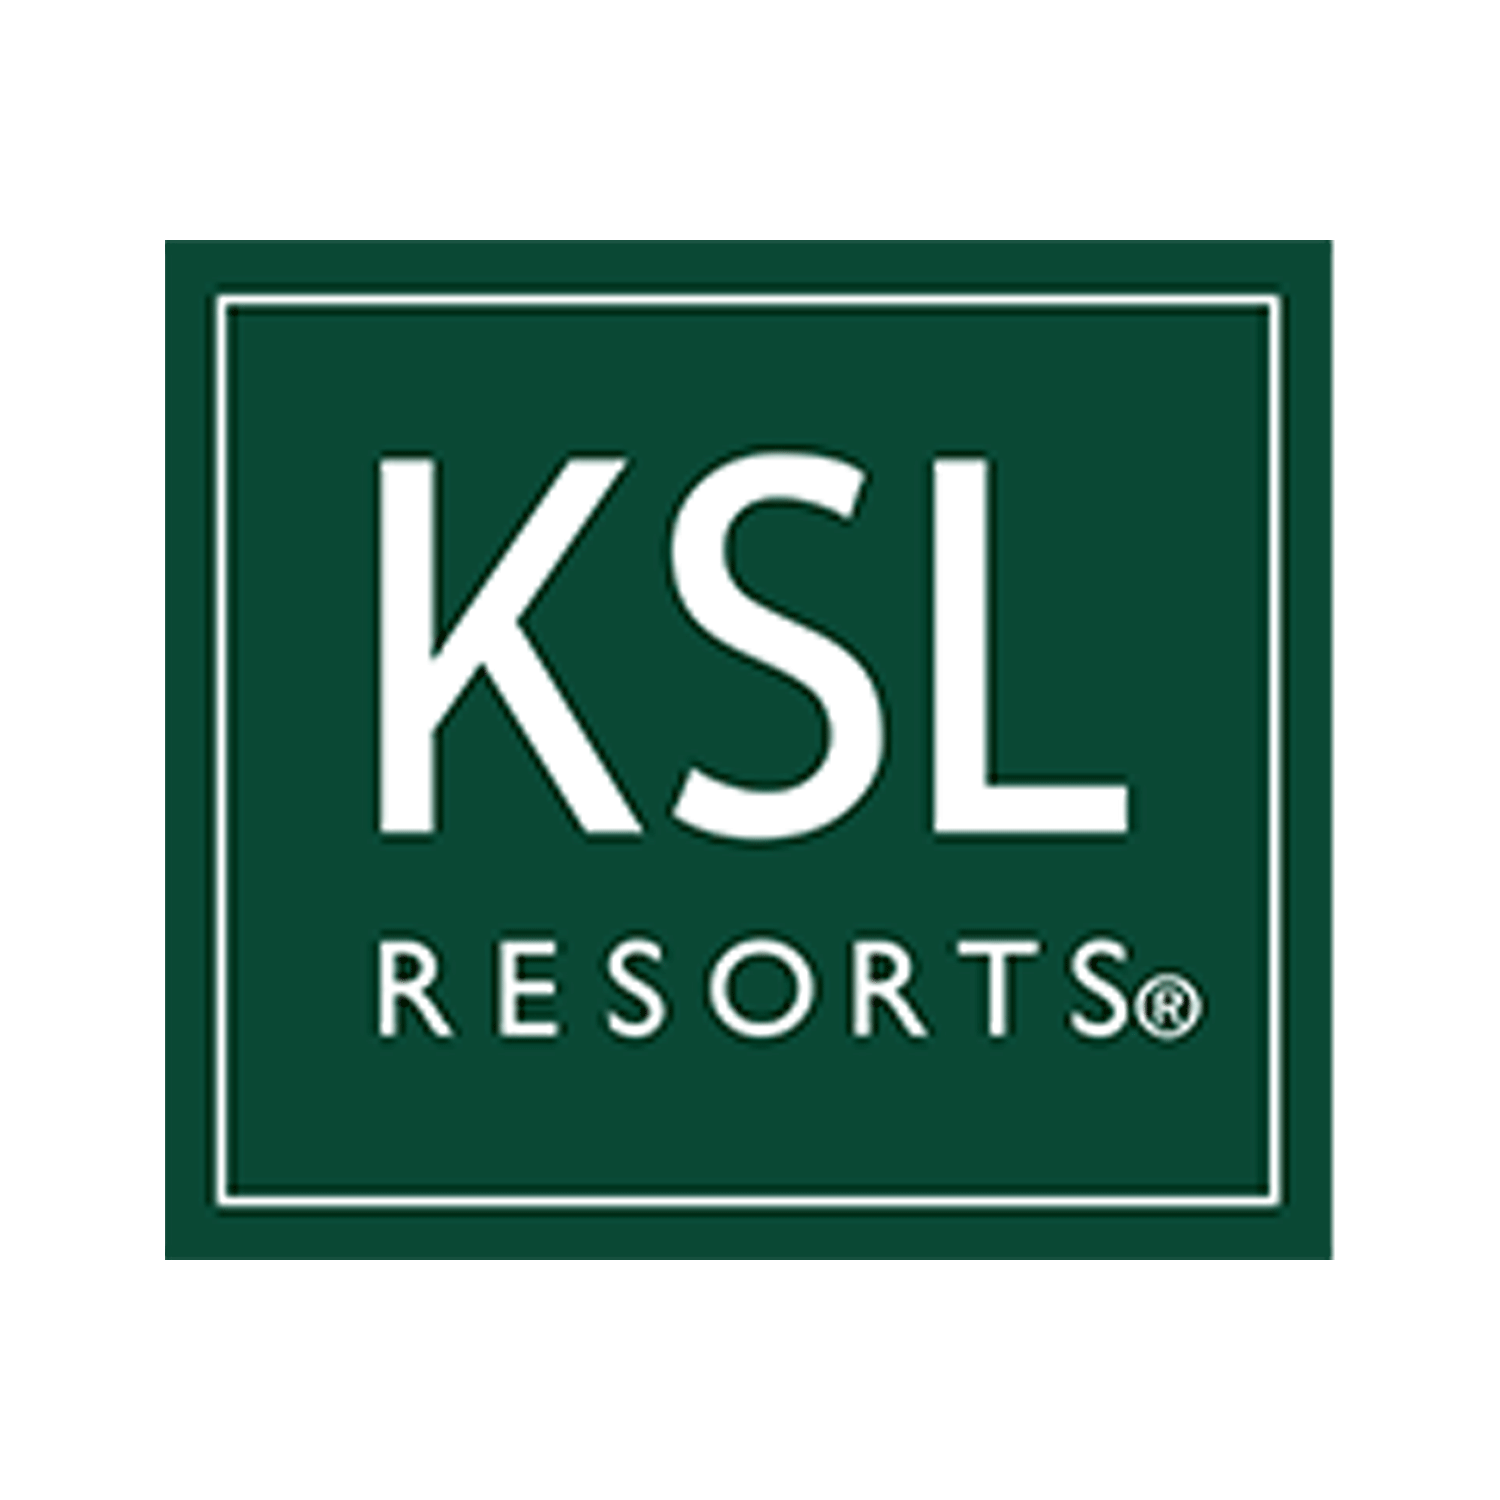 KSL-resorts-green-by-unfiltered.png